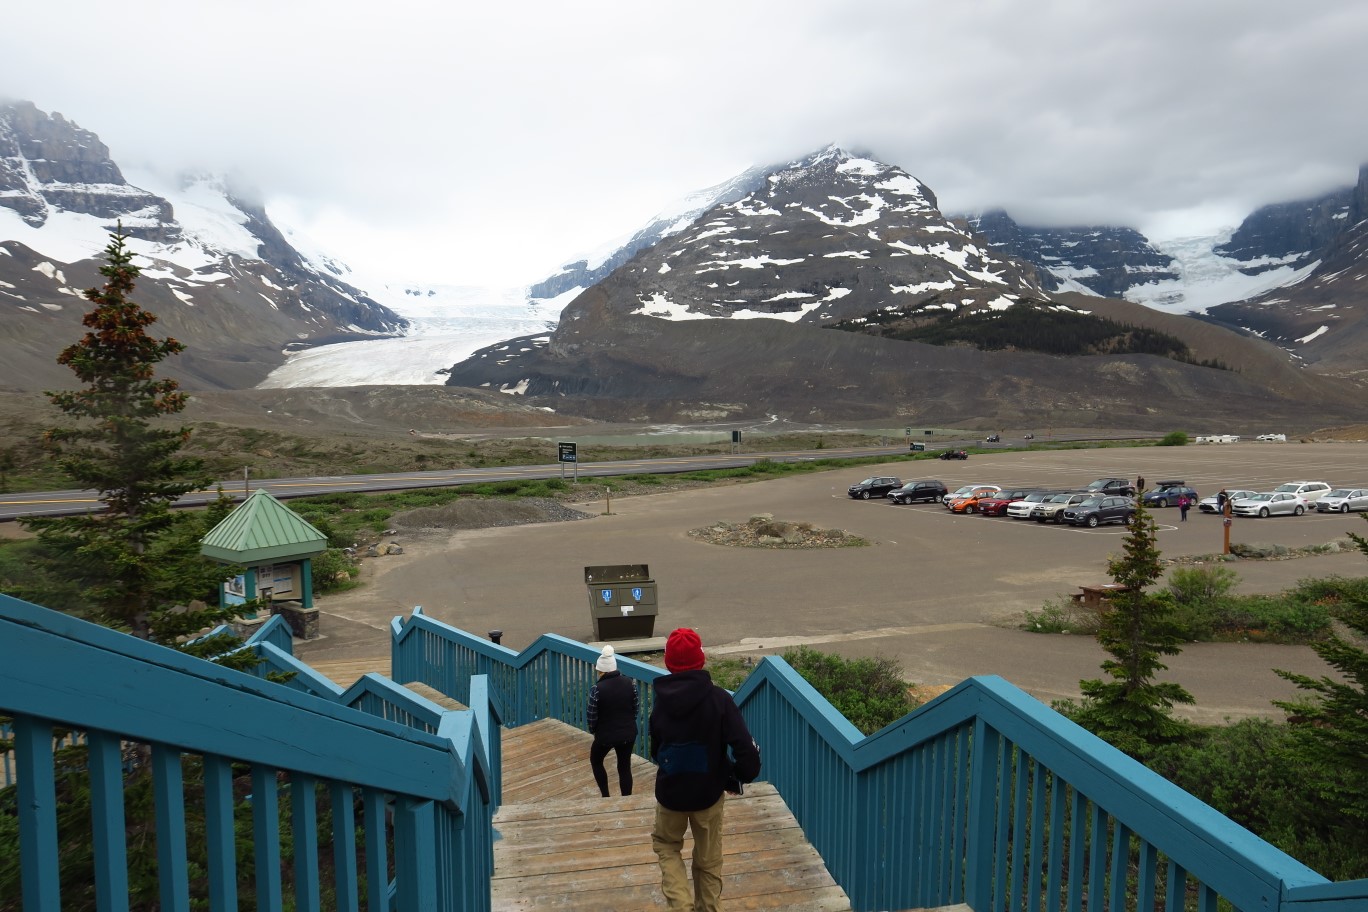 006-leaving_the_Columbia_Icefield_Centre_to_meet_for_our_tour_at_terminus_moraine